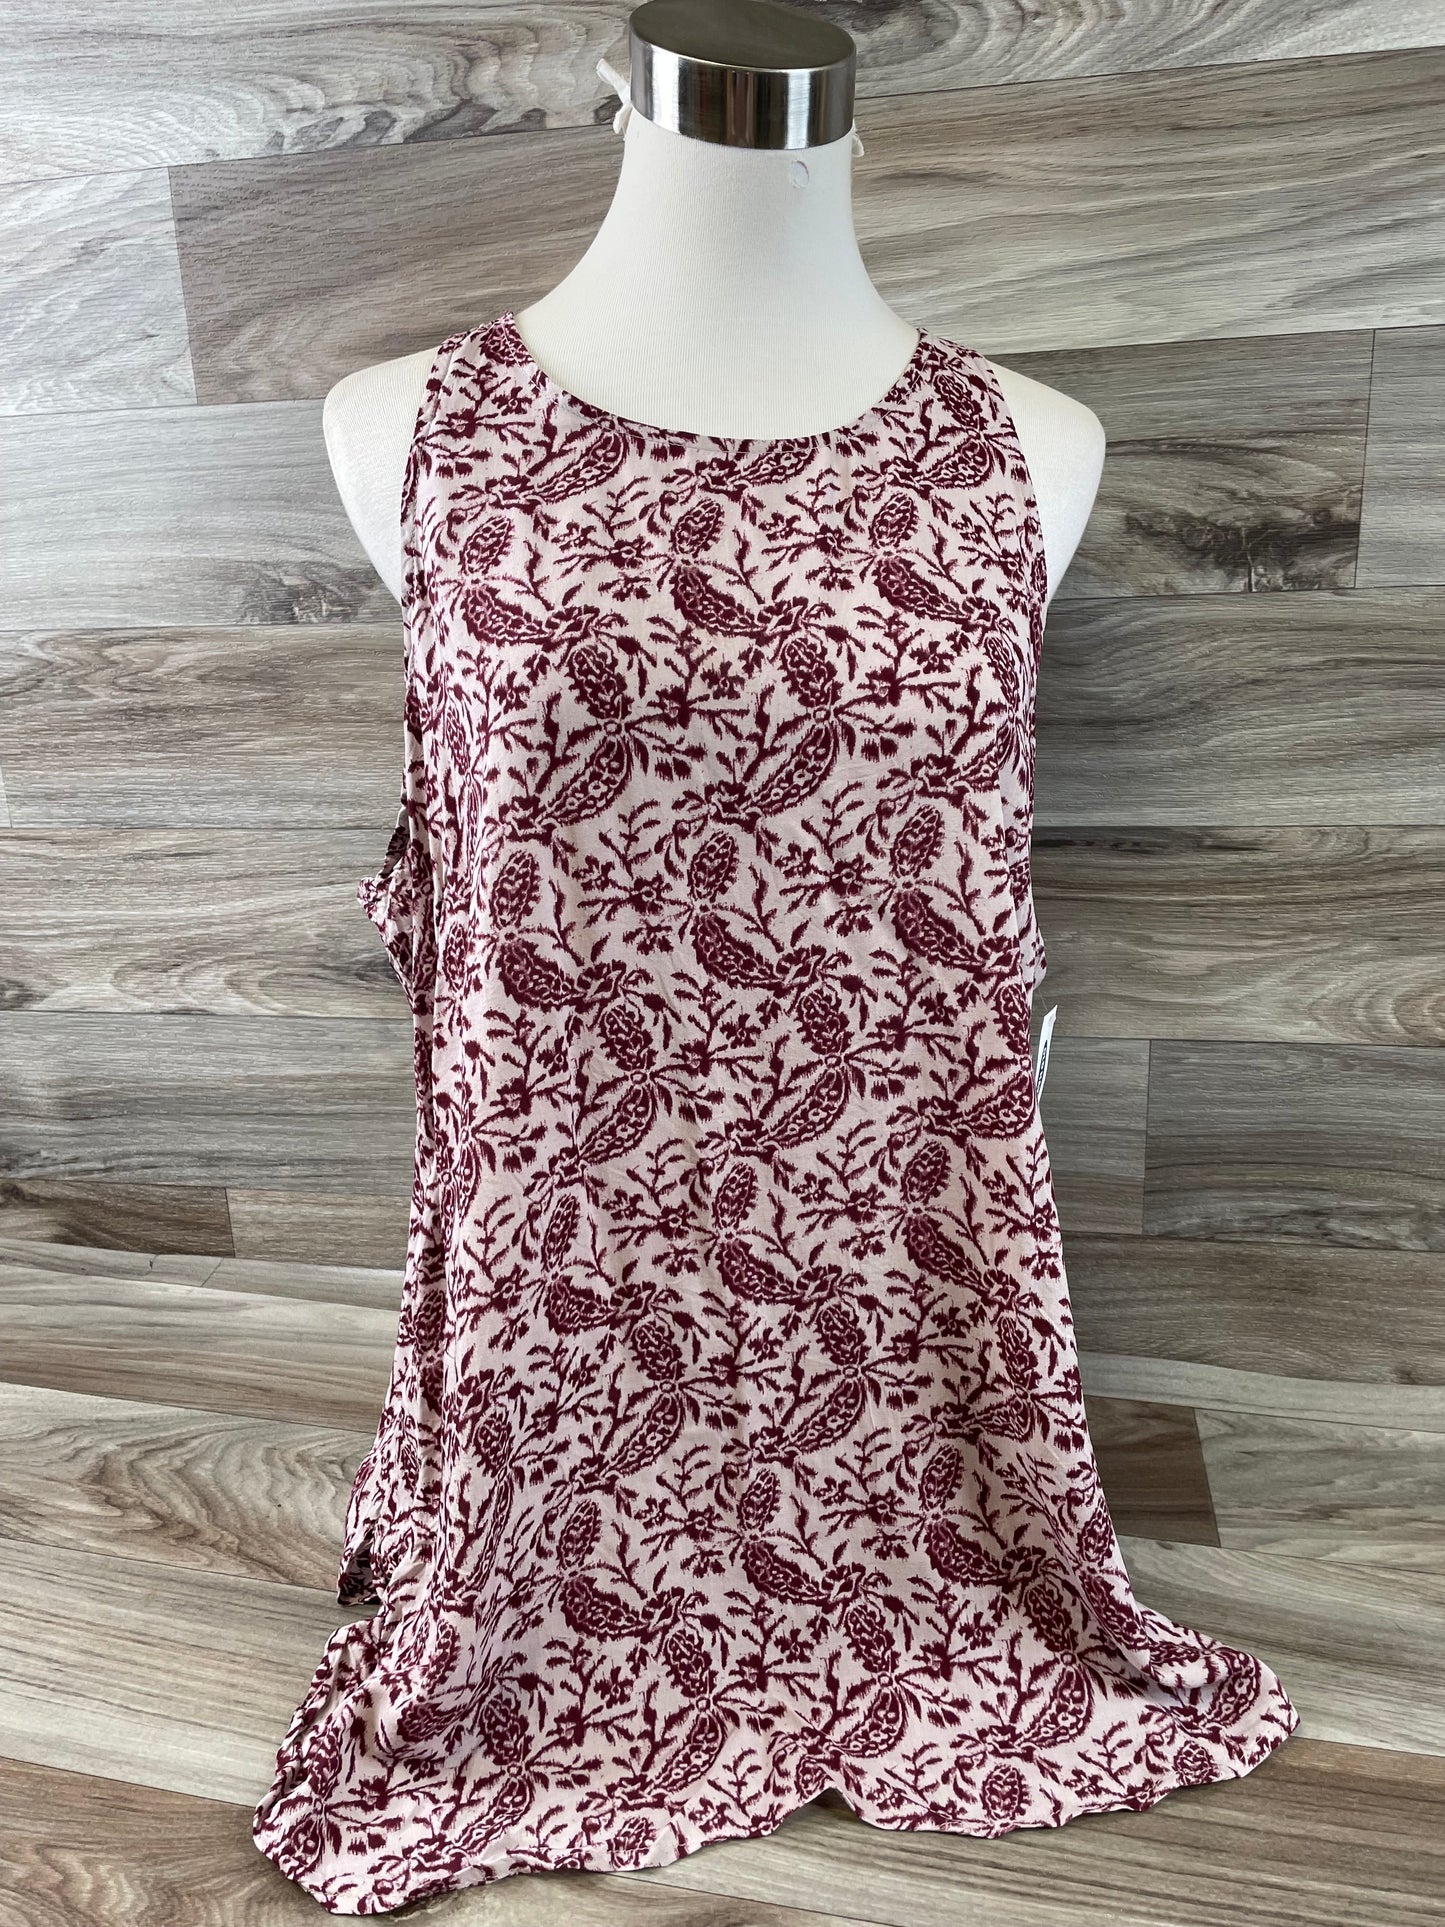 Red & Tan Top Sleeveless Old Navy, Size Xl